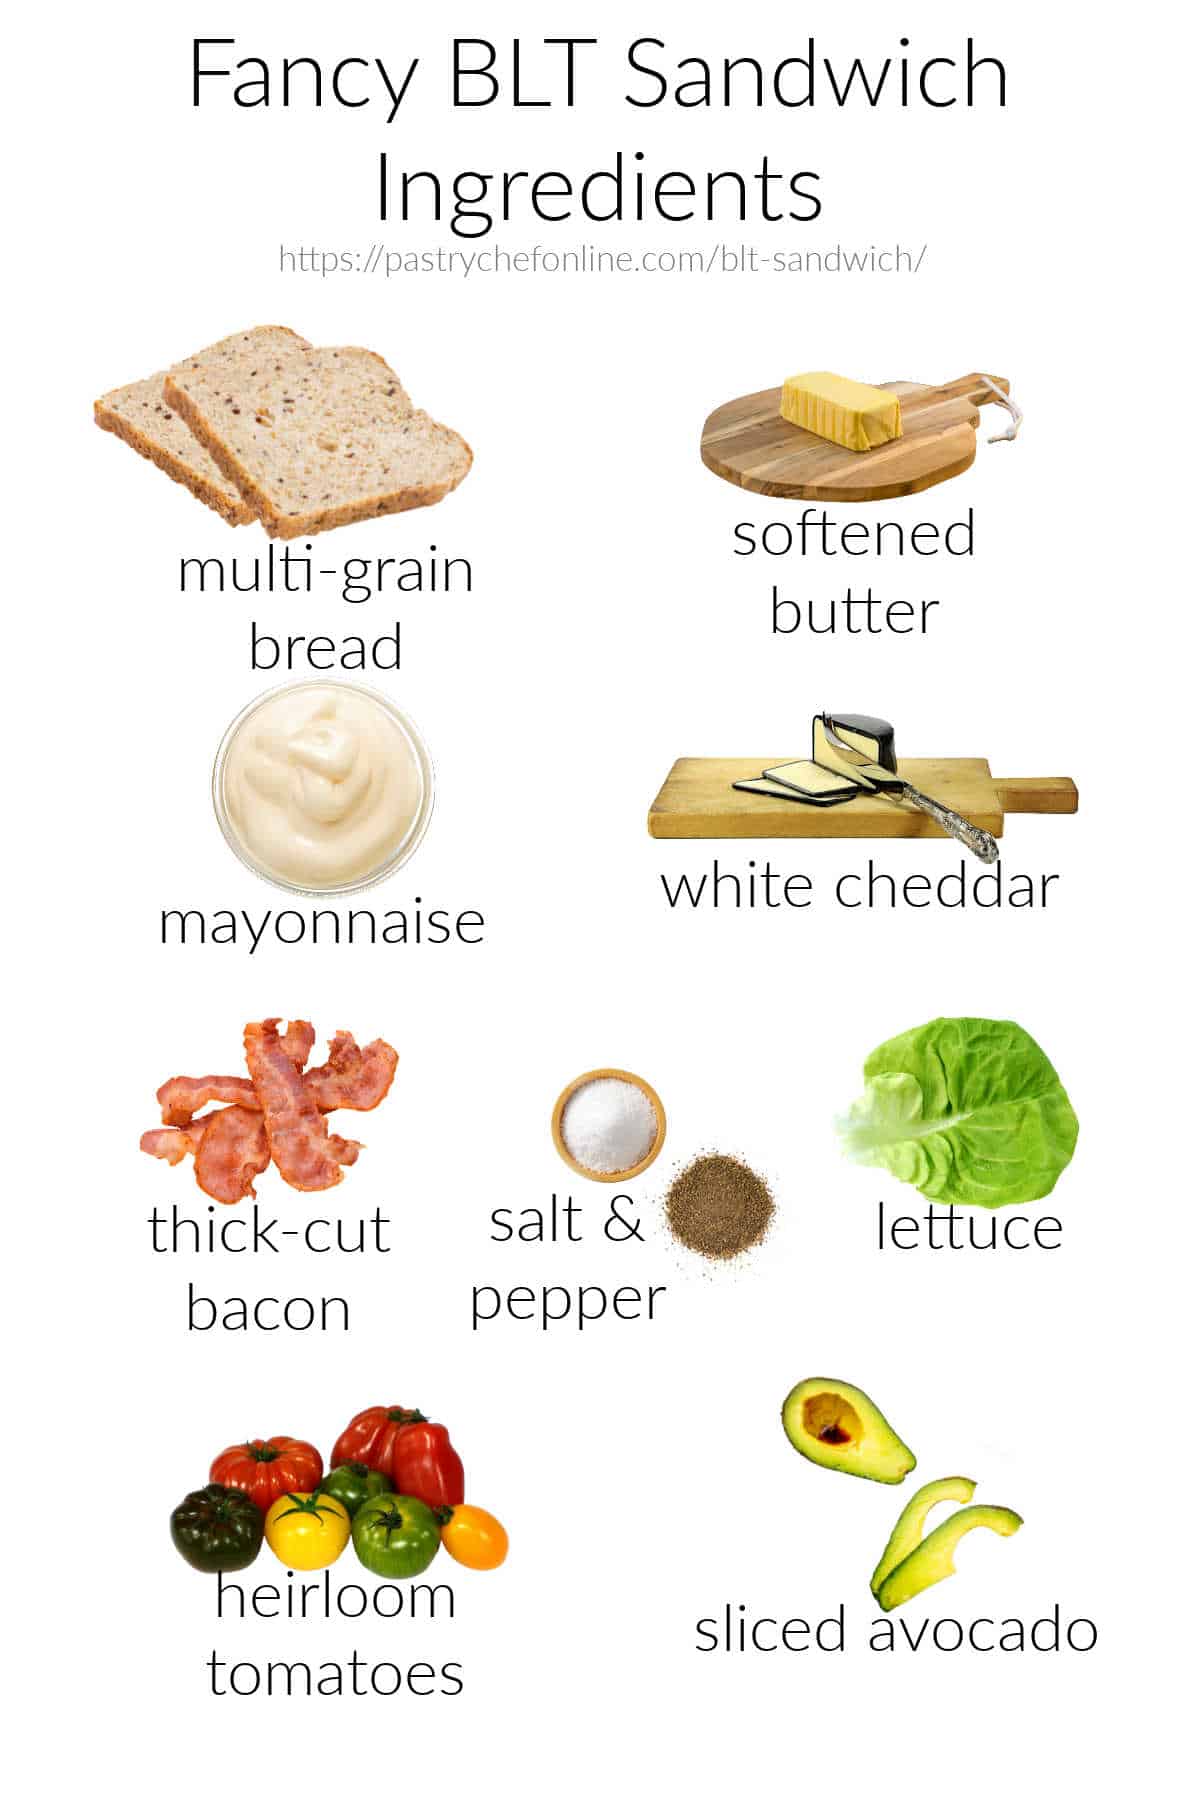 Images of all the ingredients needed to make a gourmet BLT sandwich, labeled and shot on a white background. Ingredients are multi-grain bread, butter, mayonnaise, white cheddar cheese, bacon, lettuce, salt & pepper, heirloom tomatoes, and avocado slices.